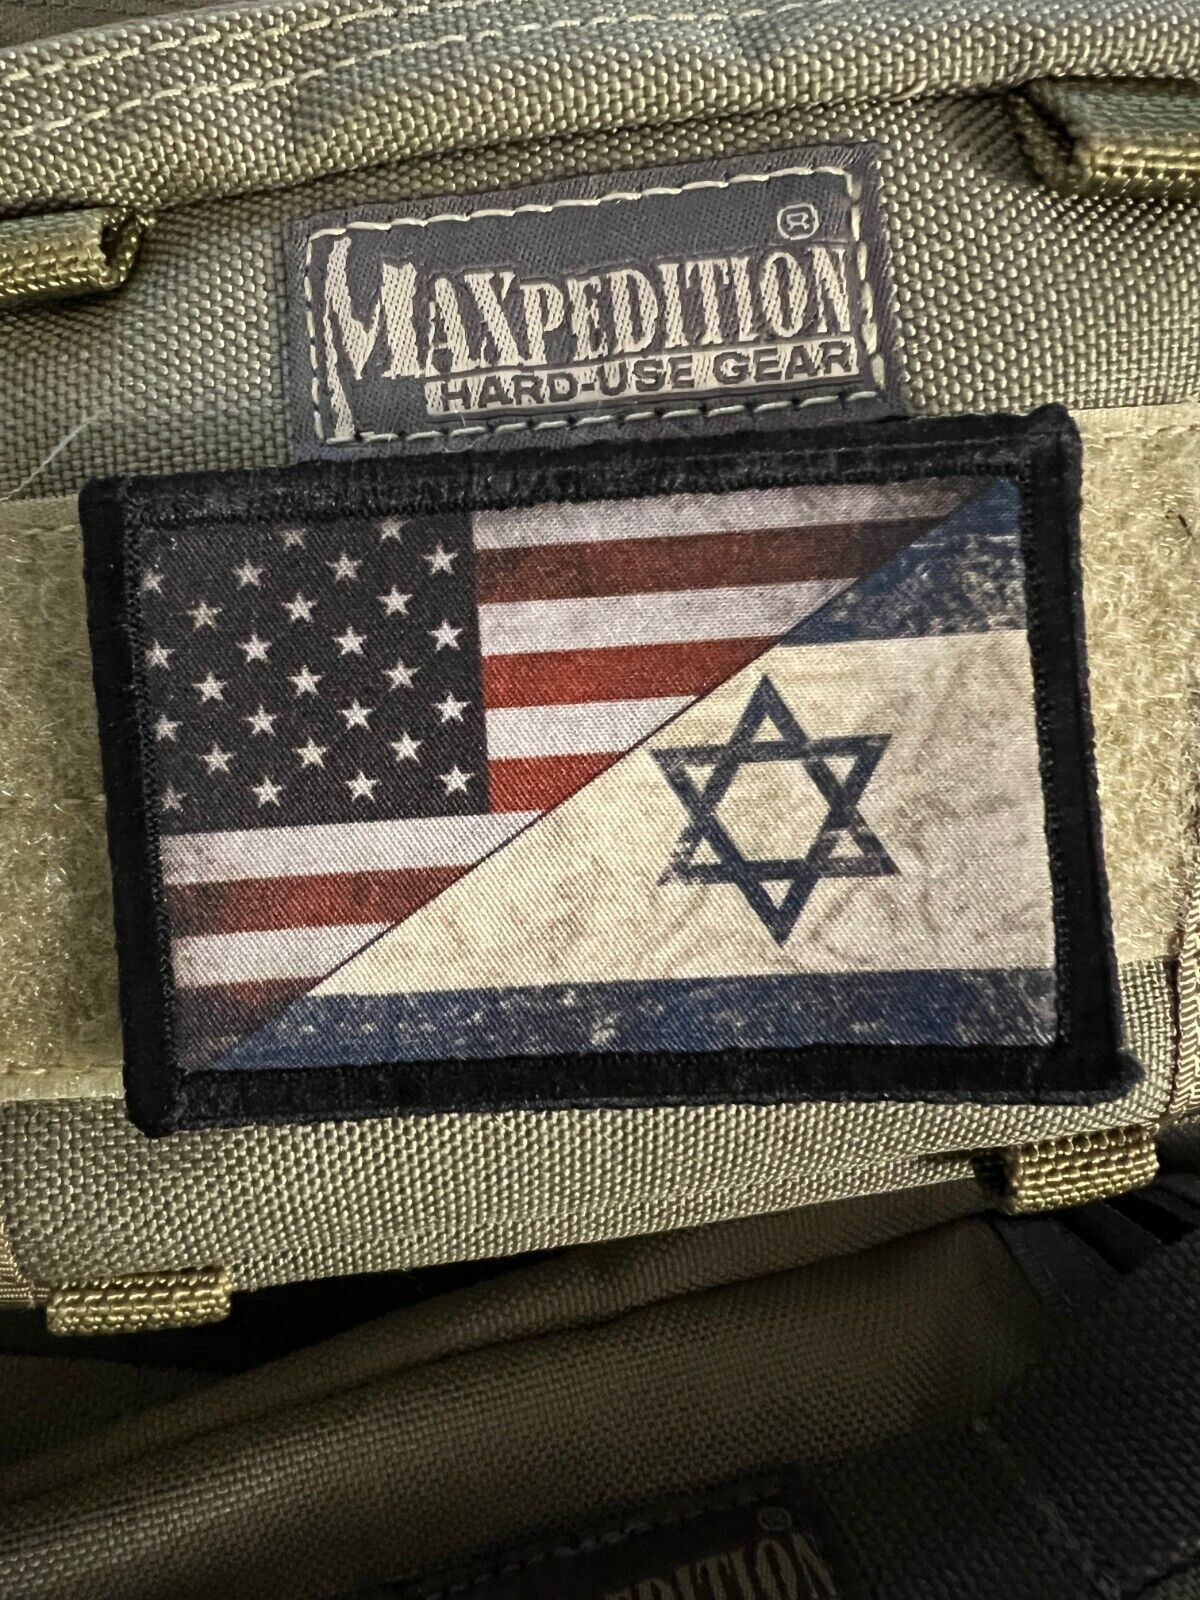 USA Israel Flag Morale Patch Tactical Military Army Badge Hook 